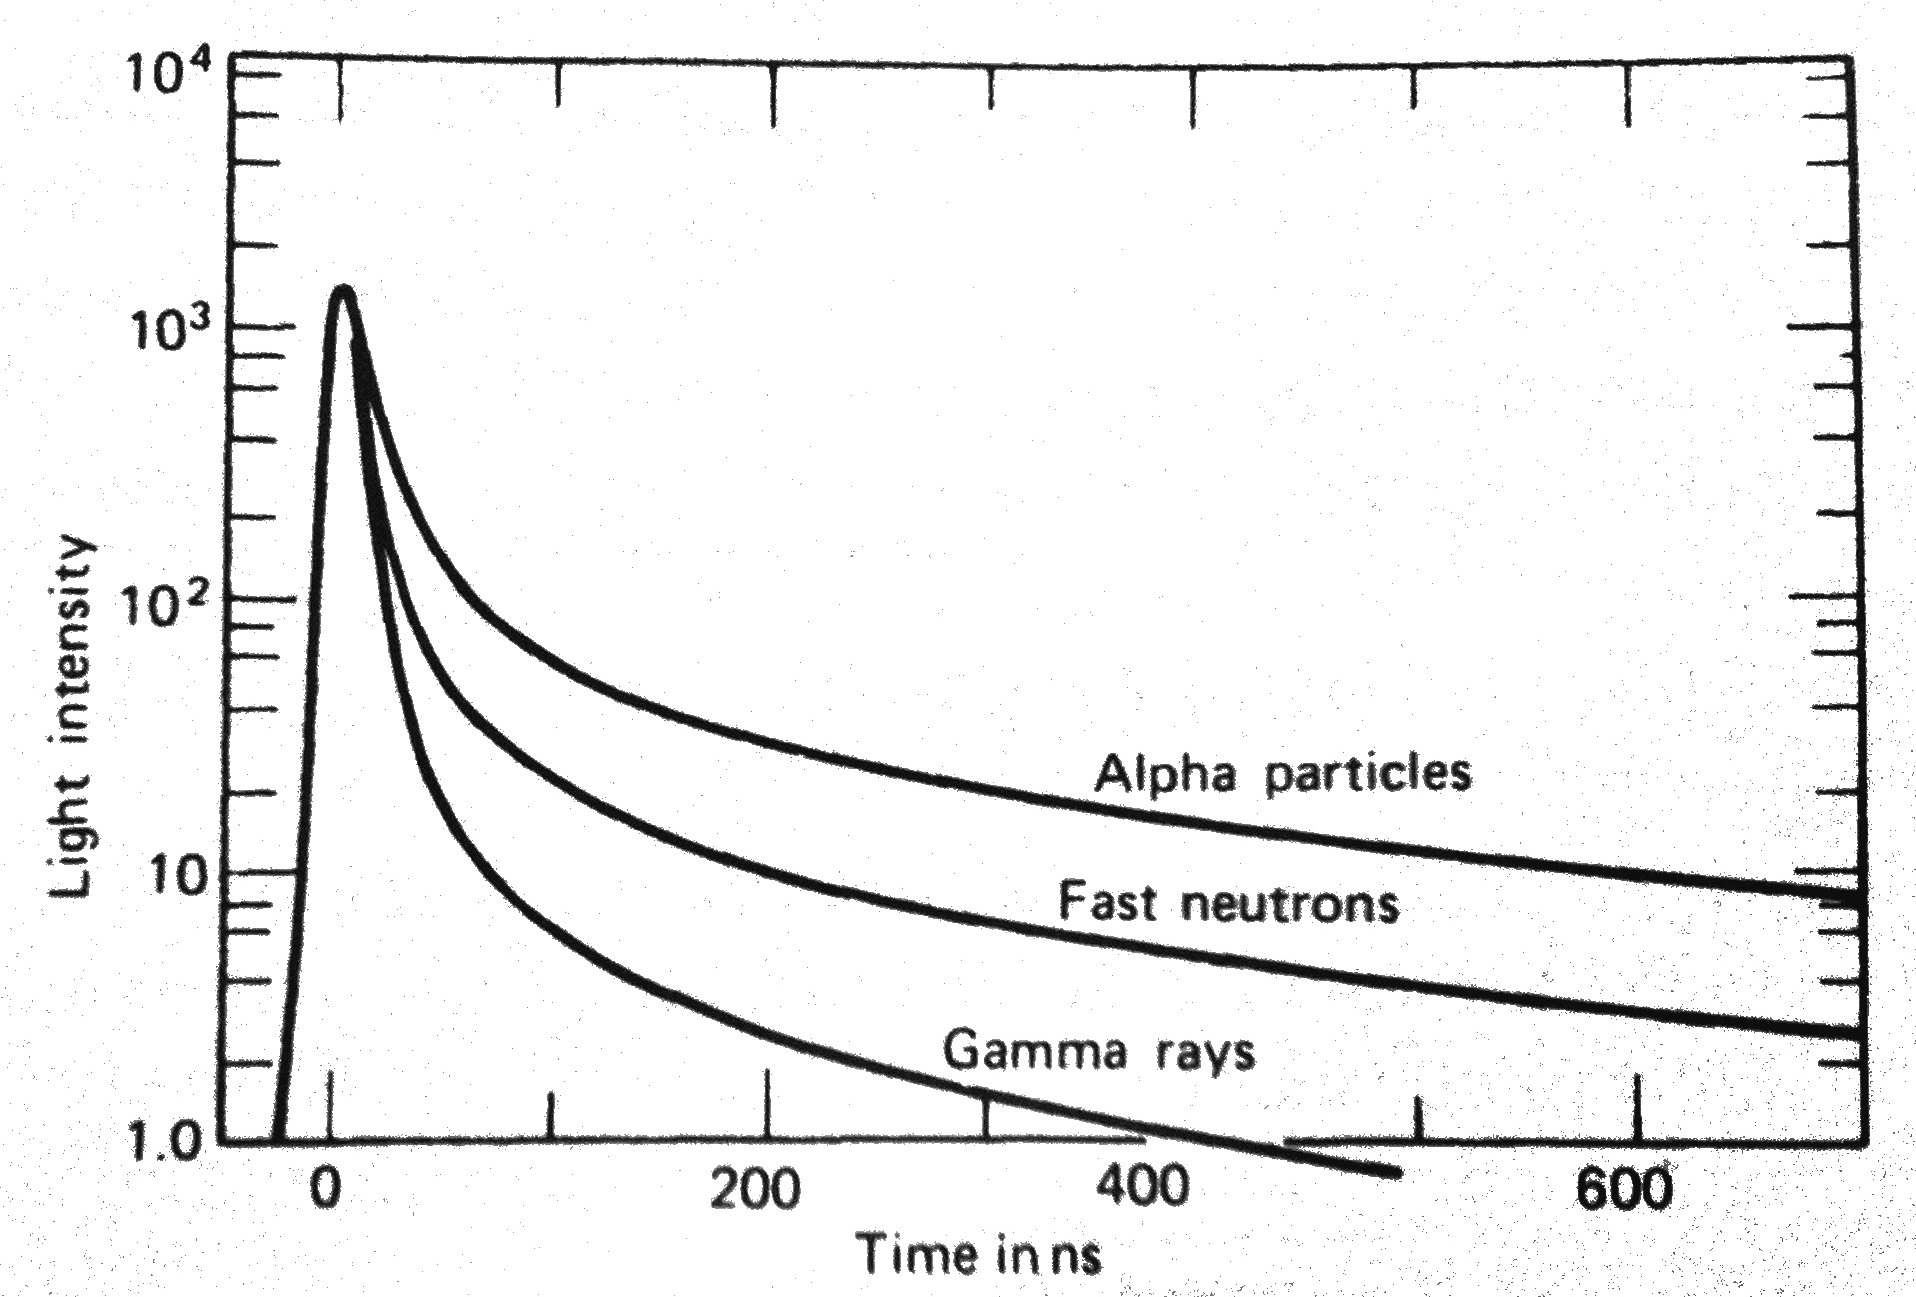 The time dependence of scintillation pulses in stilbene (equal intensity at time zero) when excited by radiations of different type